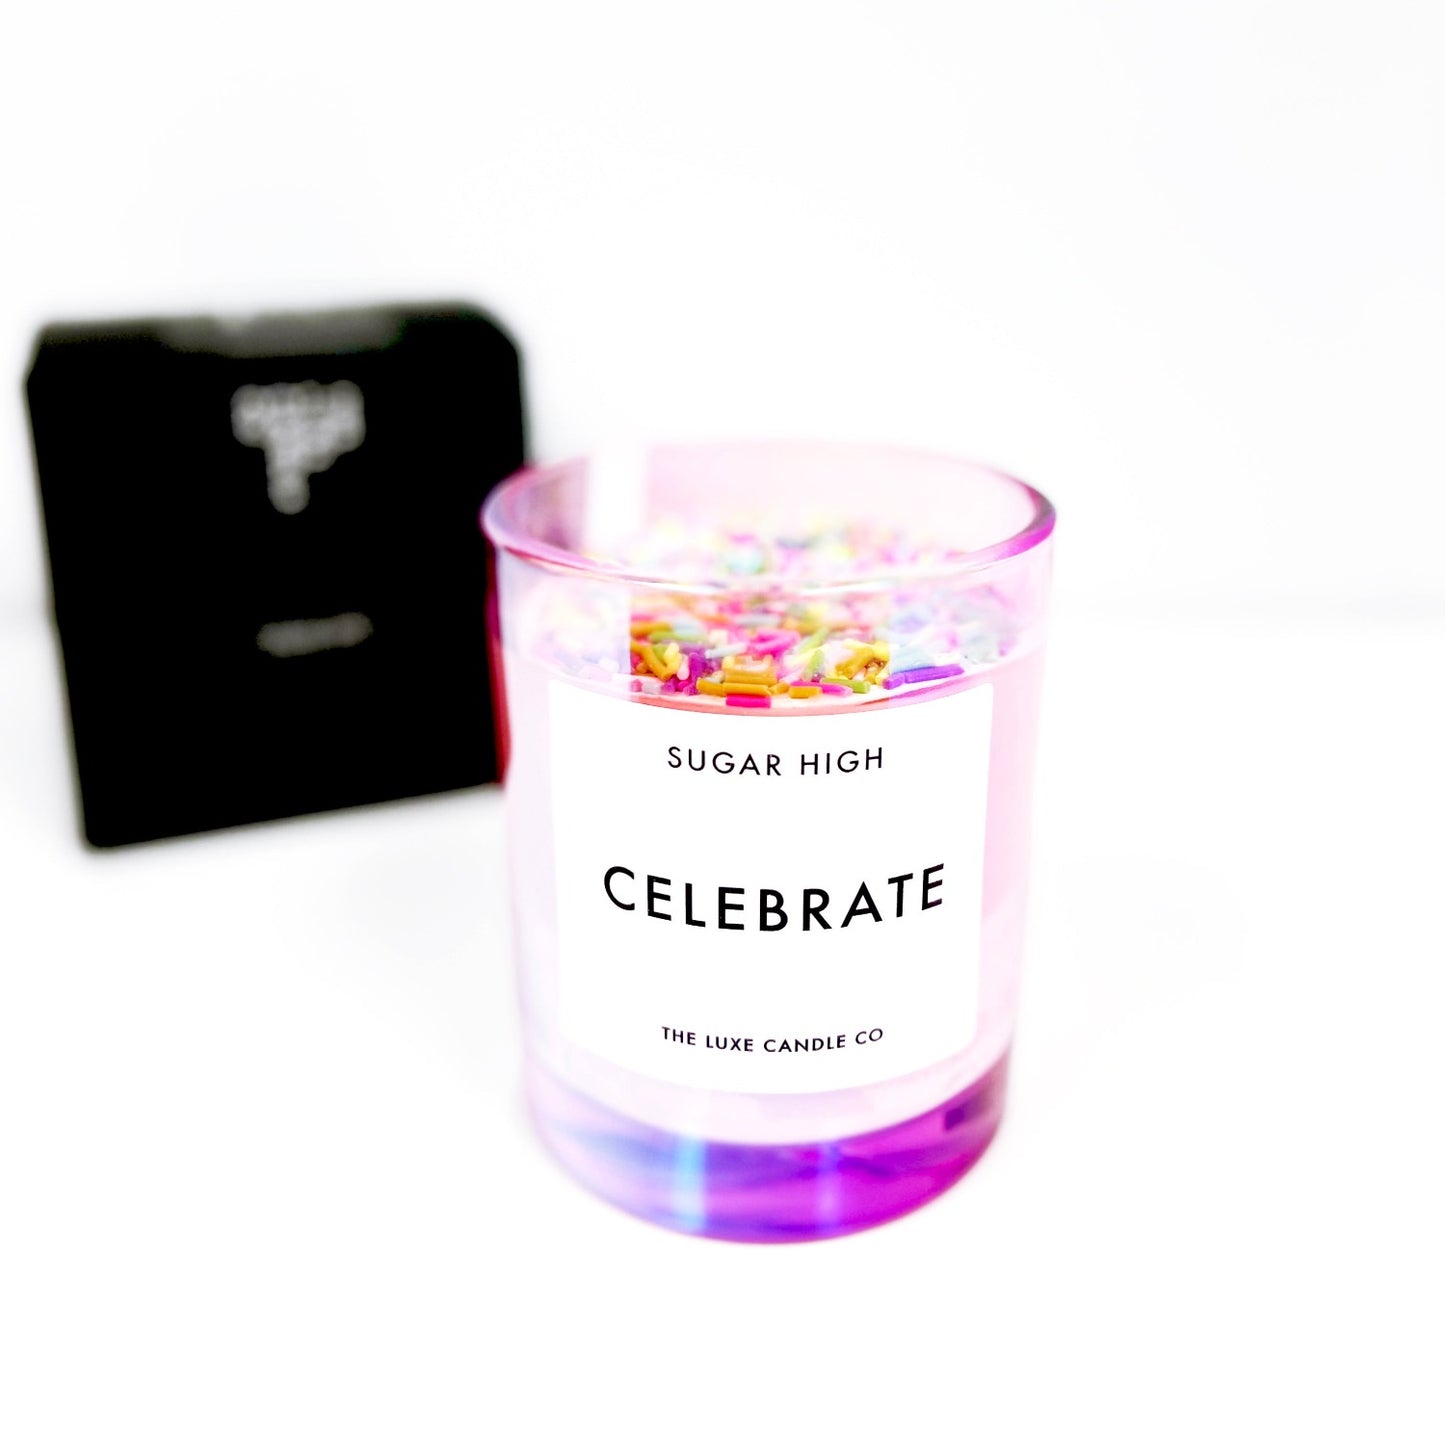 Luxury soy wax candle with birthday cake scent fragrance in black glass jar